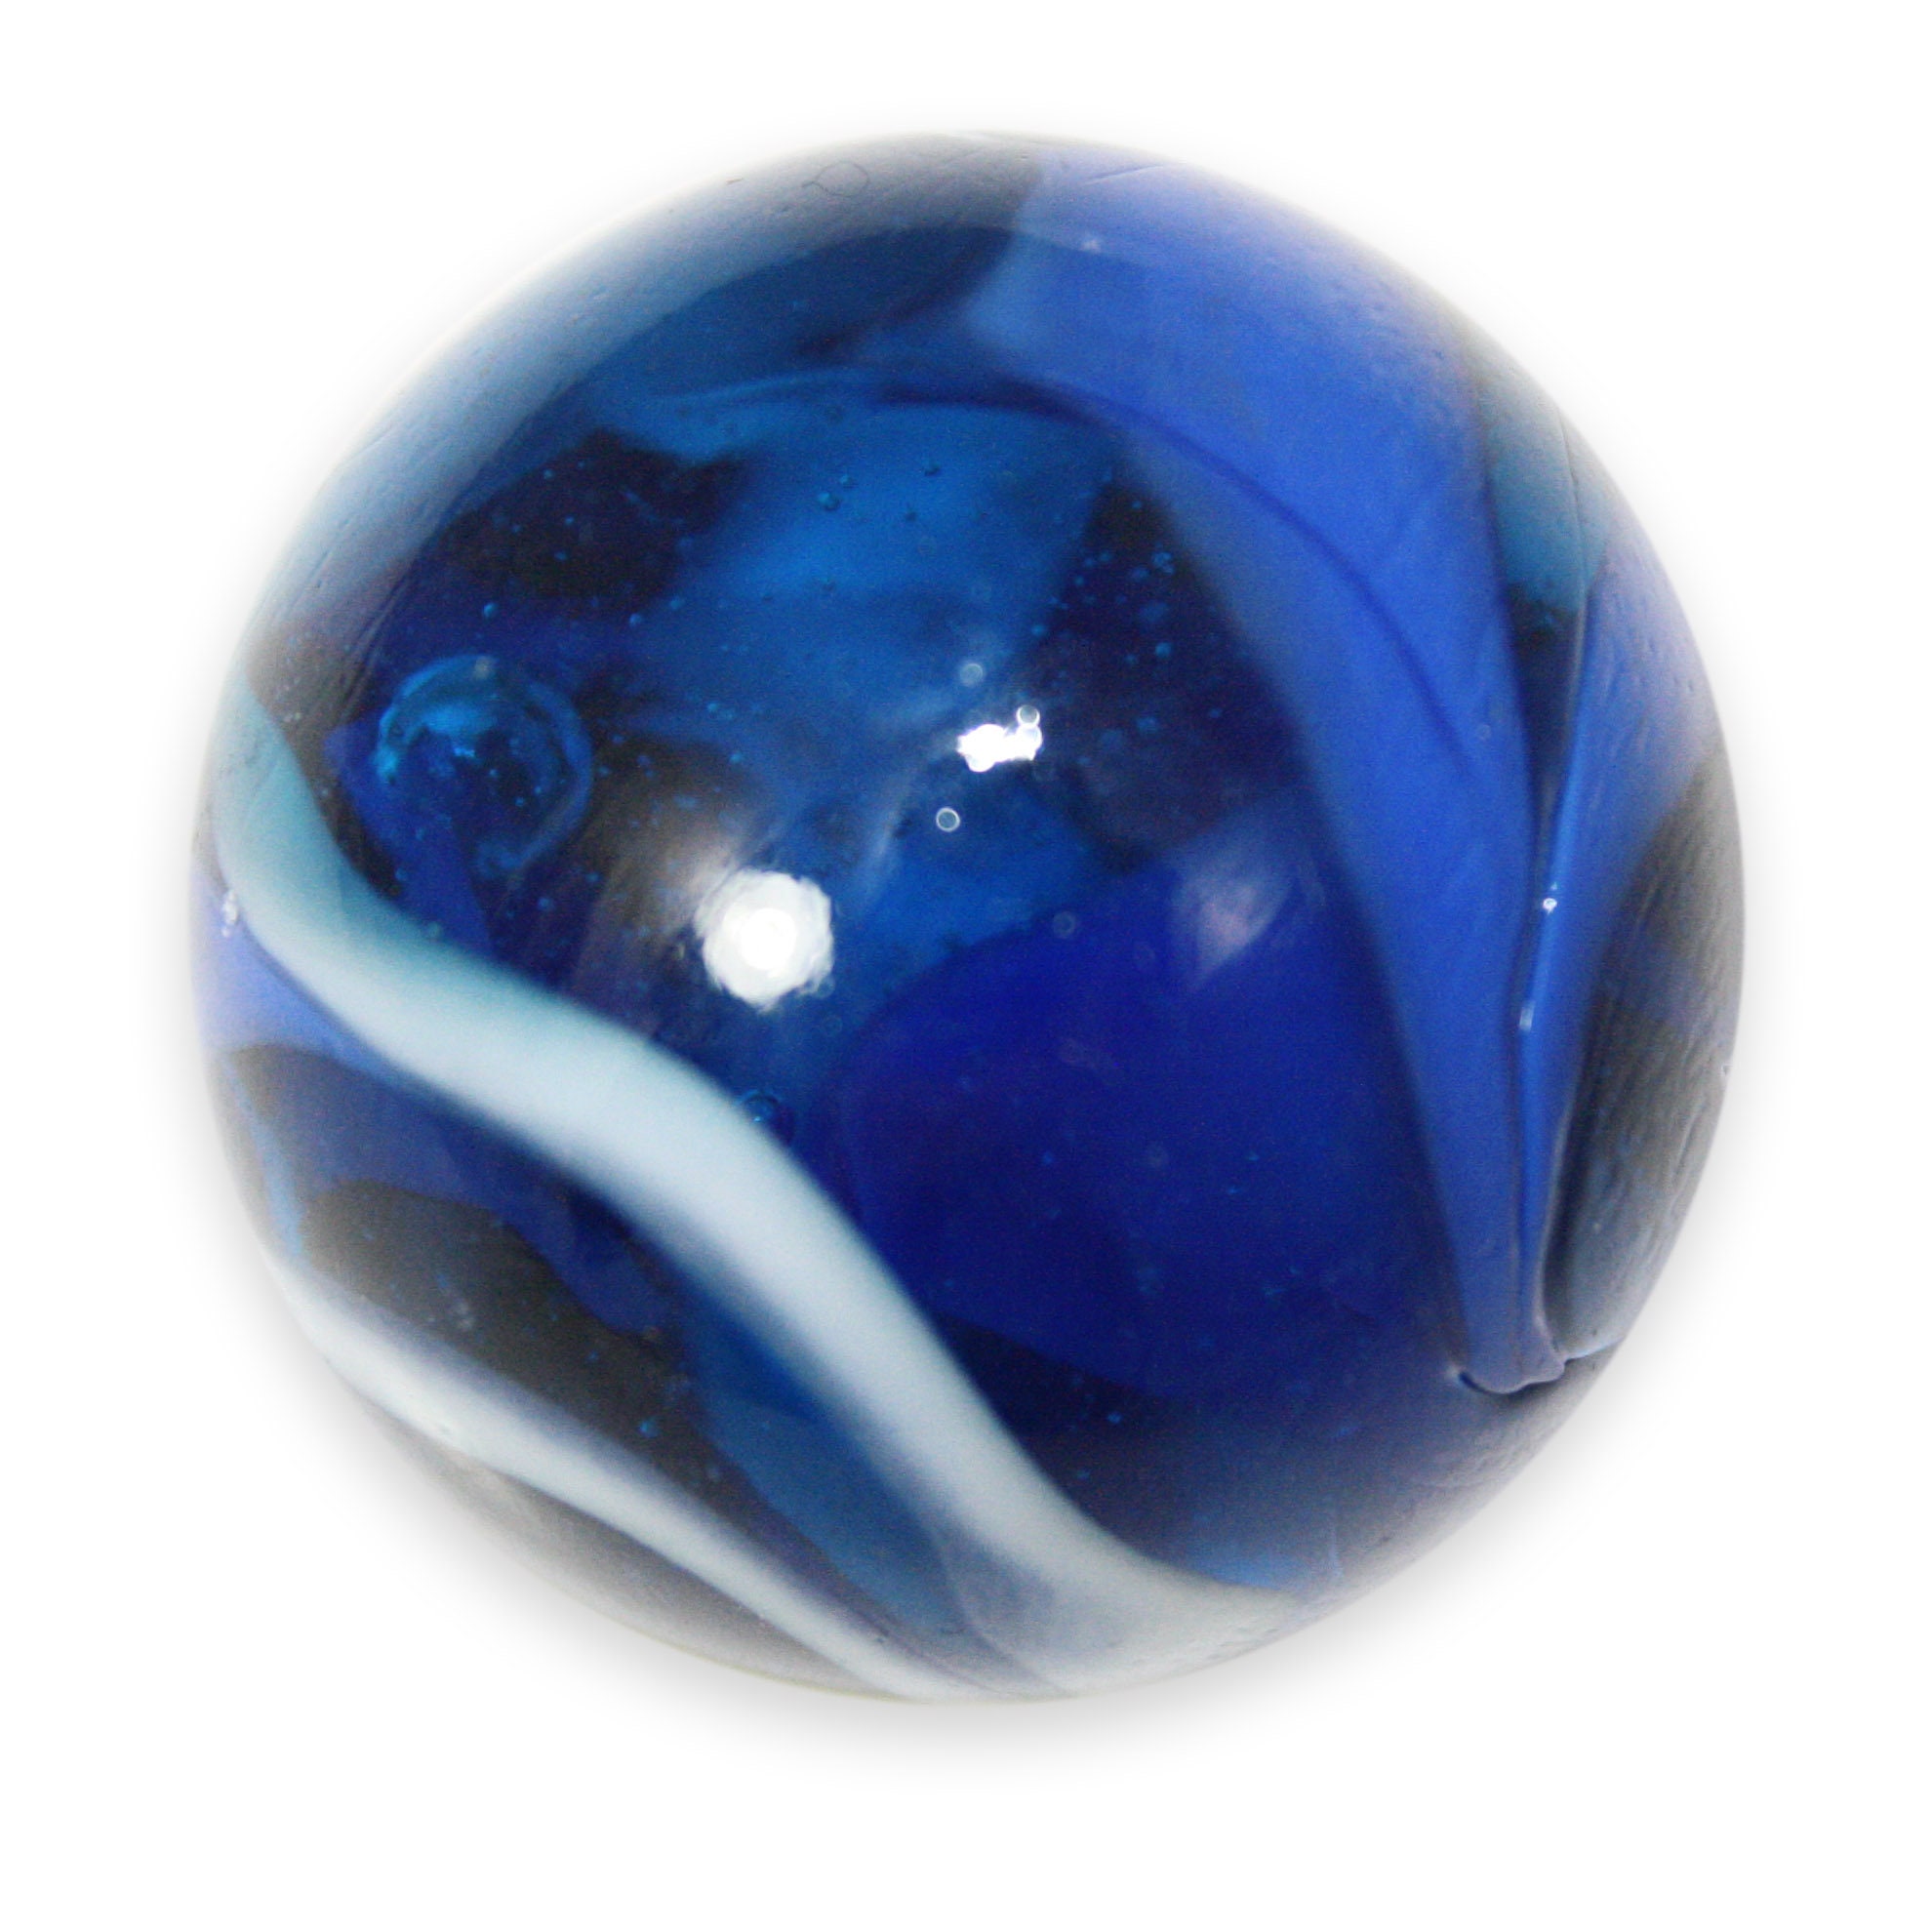 7/8" "BLUE JAY" SHOOTER MARBLES NEW 4 x 22mm 